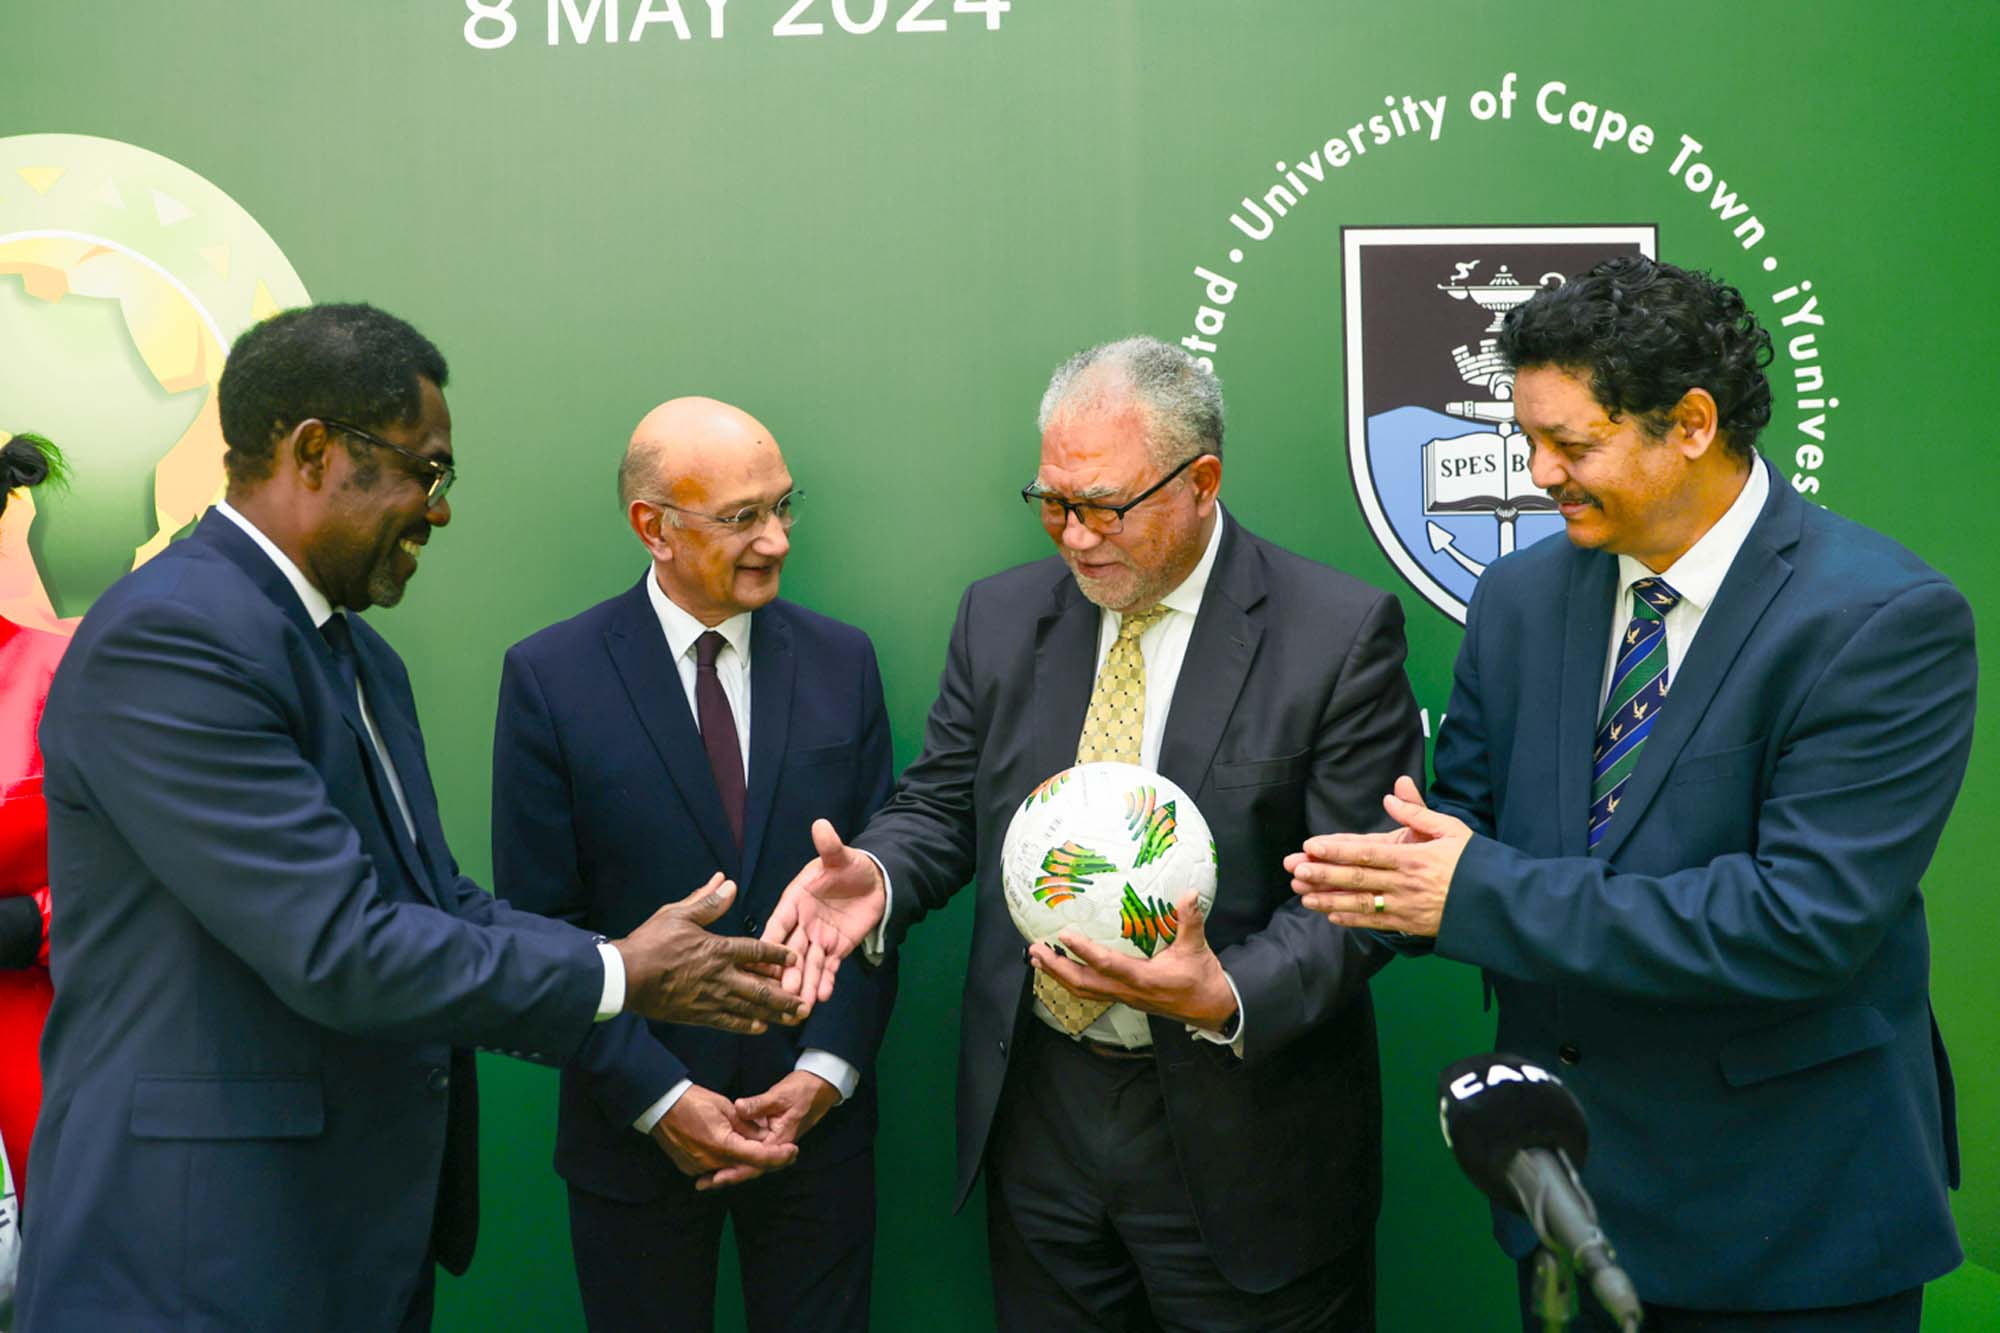 UCT Council Chair, Adv Norman Arendse SC, receiving the CAF football from the CAF Secretary General.